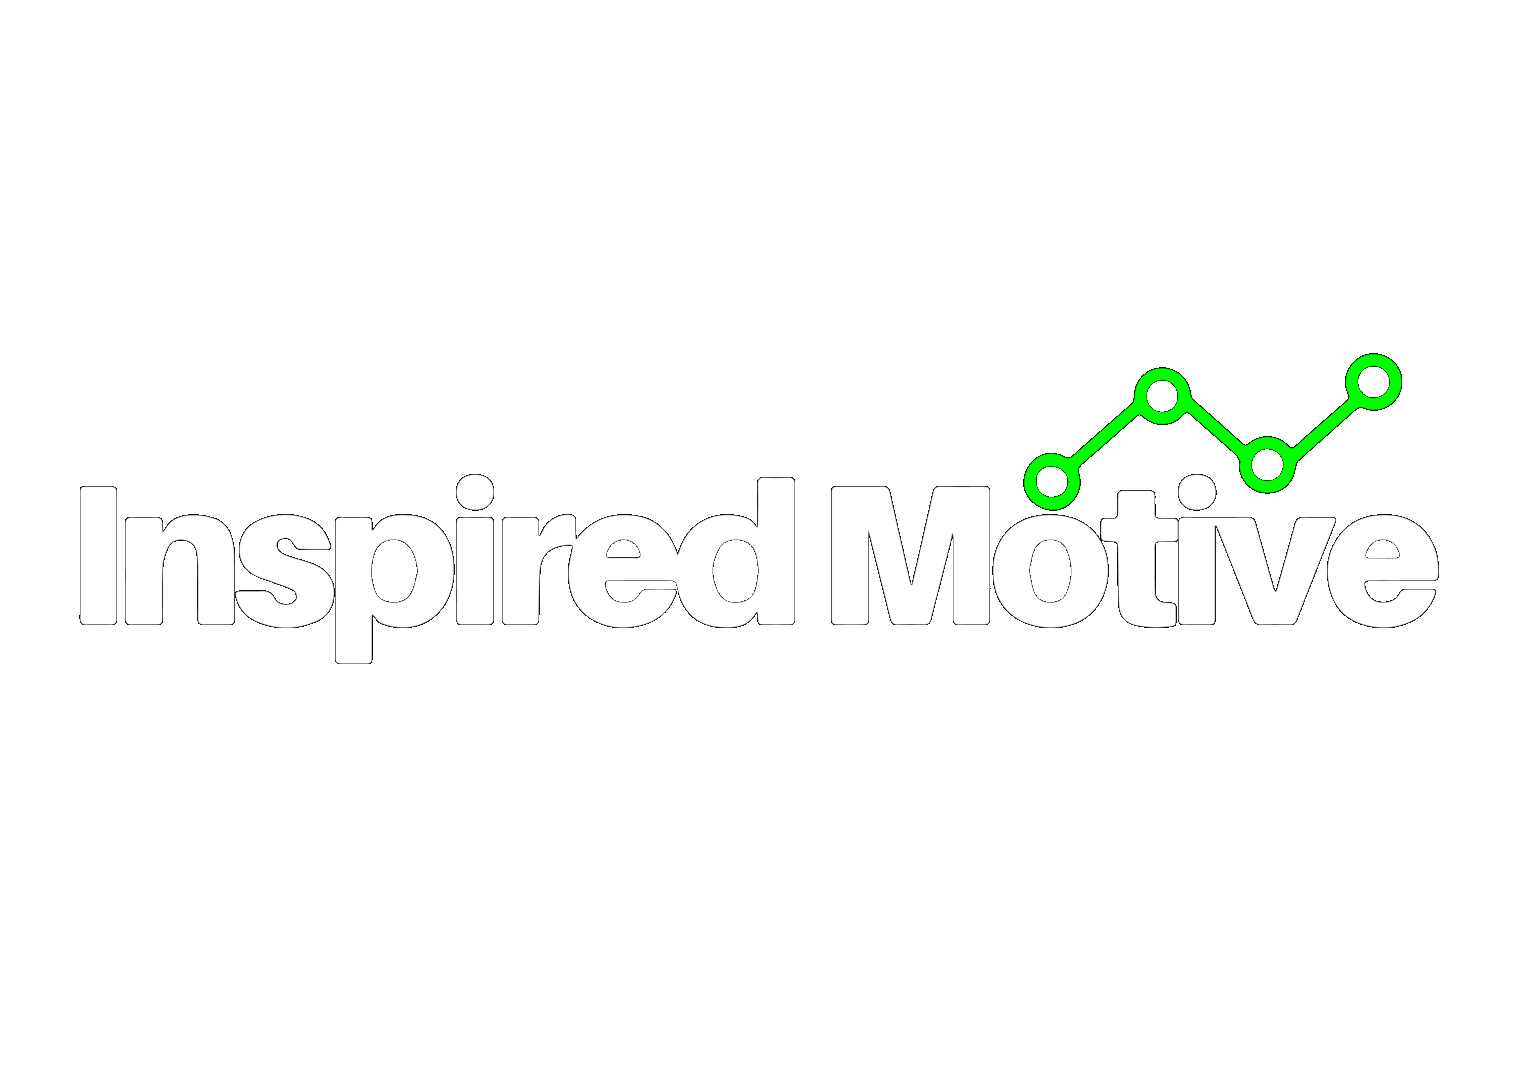 Inspired Motive written in white with a green connector above motive